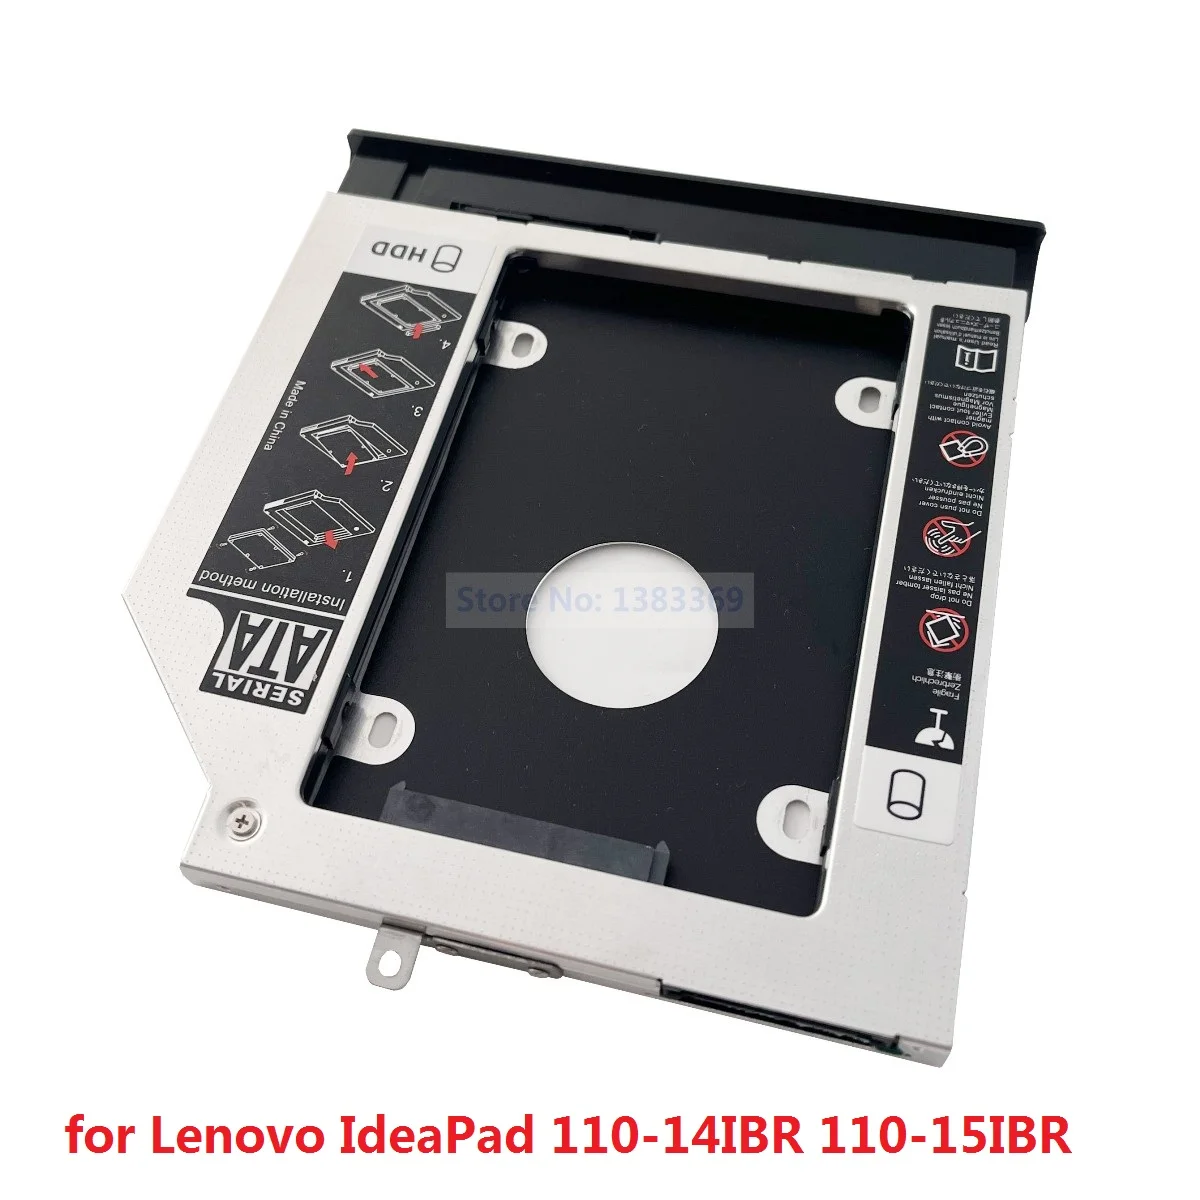 

with Bezel Faceplate Front Panel SATA 2nd Second Hard Drive SSD HDD Module Caddy Frame for Lenovo IdeaPad 110-14IBR 110-15IBR